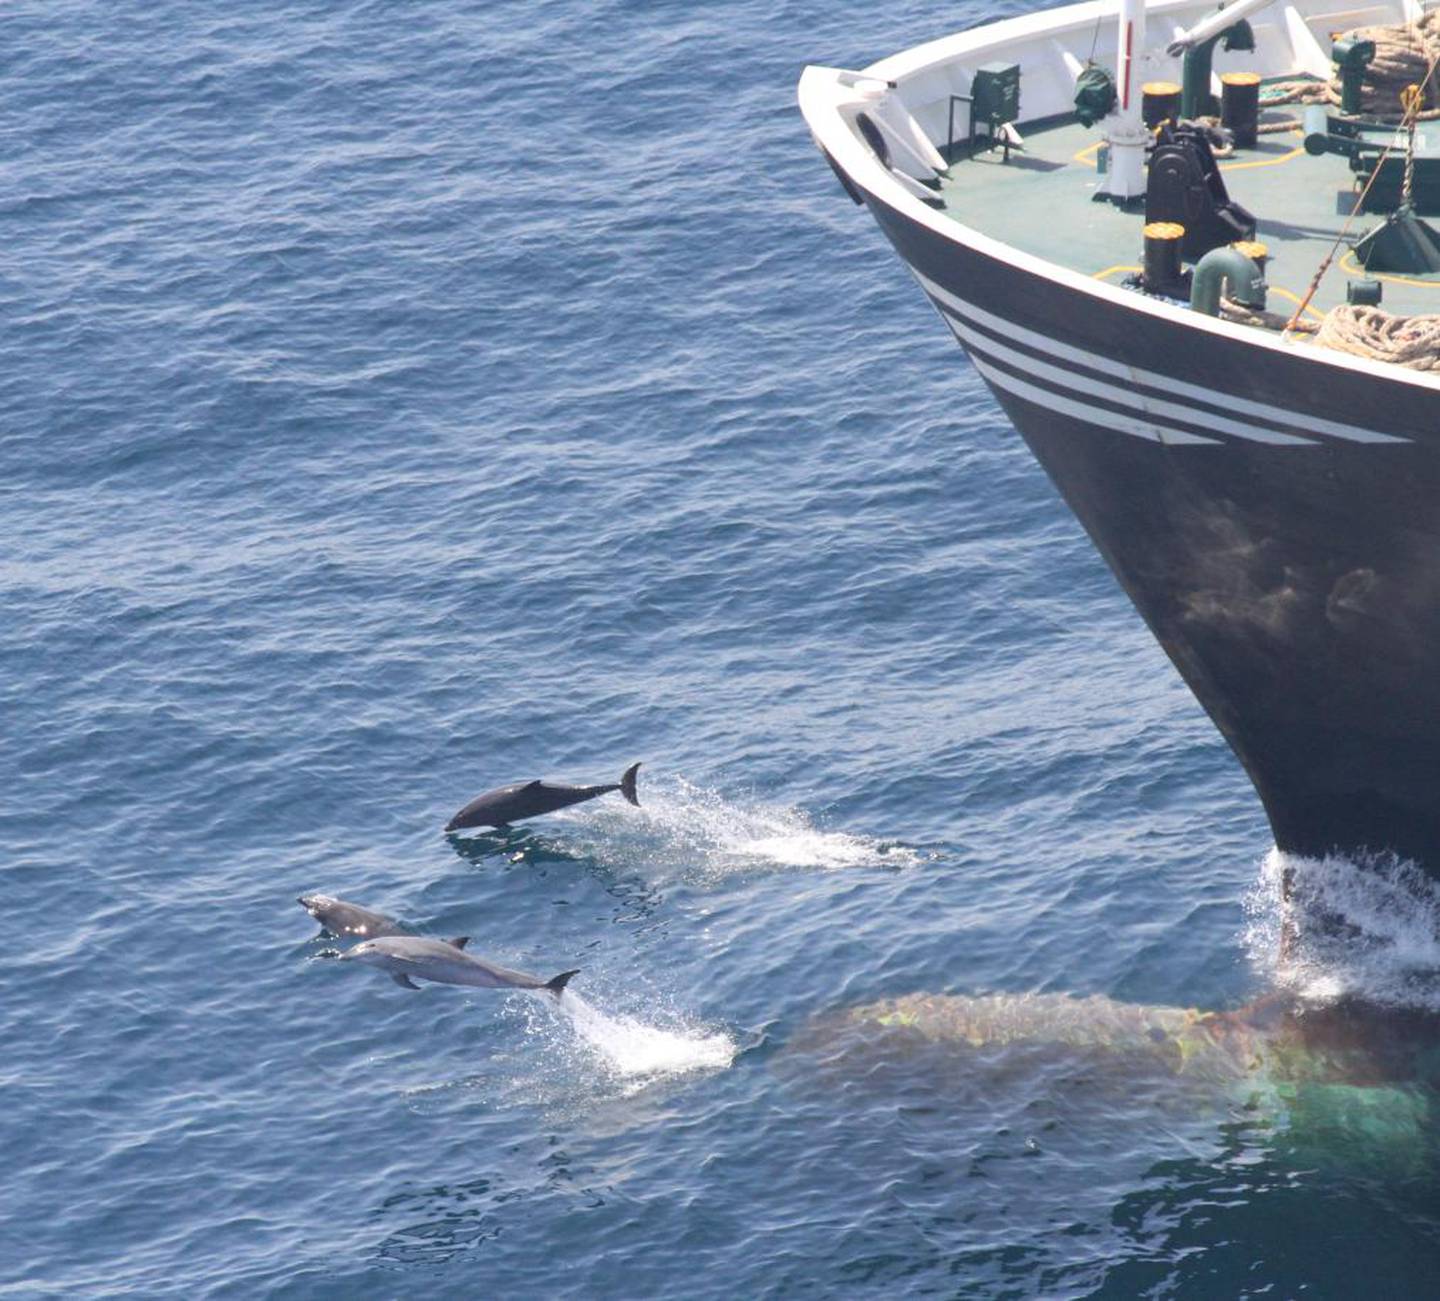 A pod of dolphins ride the wake of a ship in Fujairah's waters. Courtesy The Fujairah Whale and Dolphin Research Project